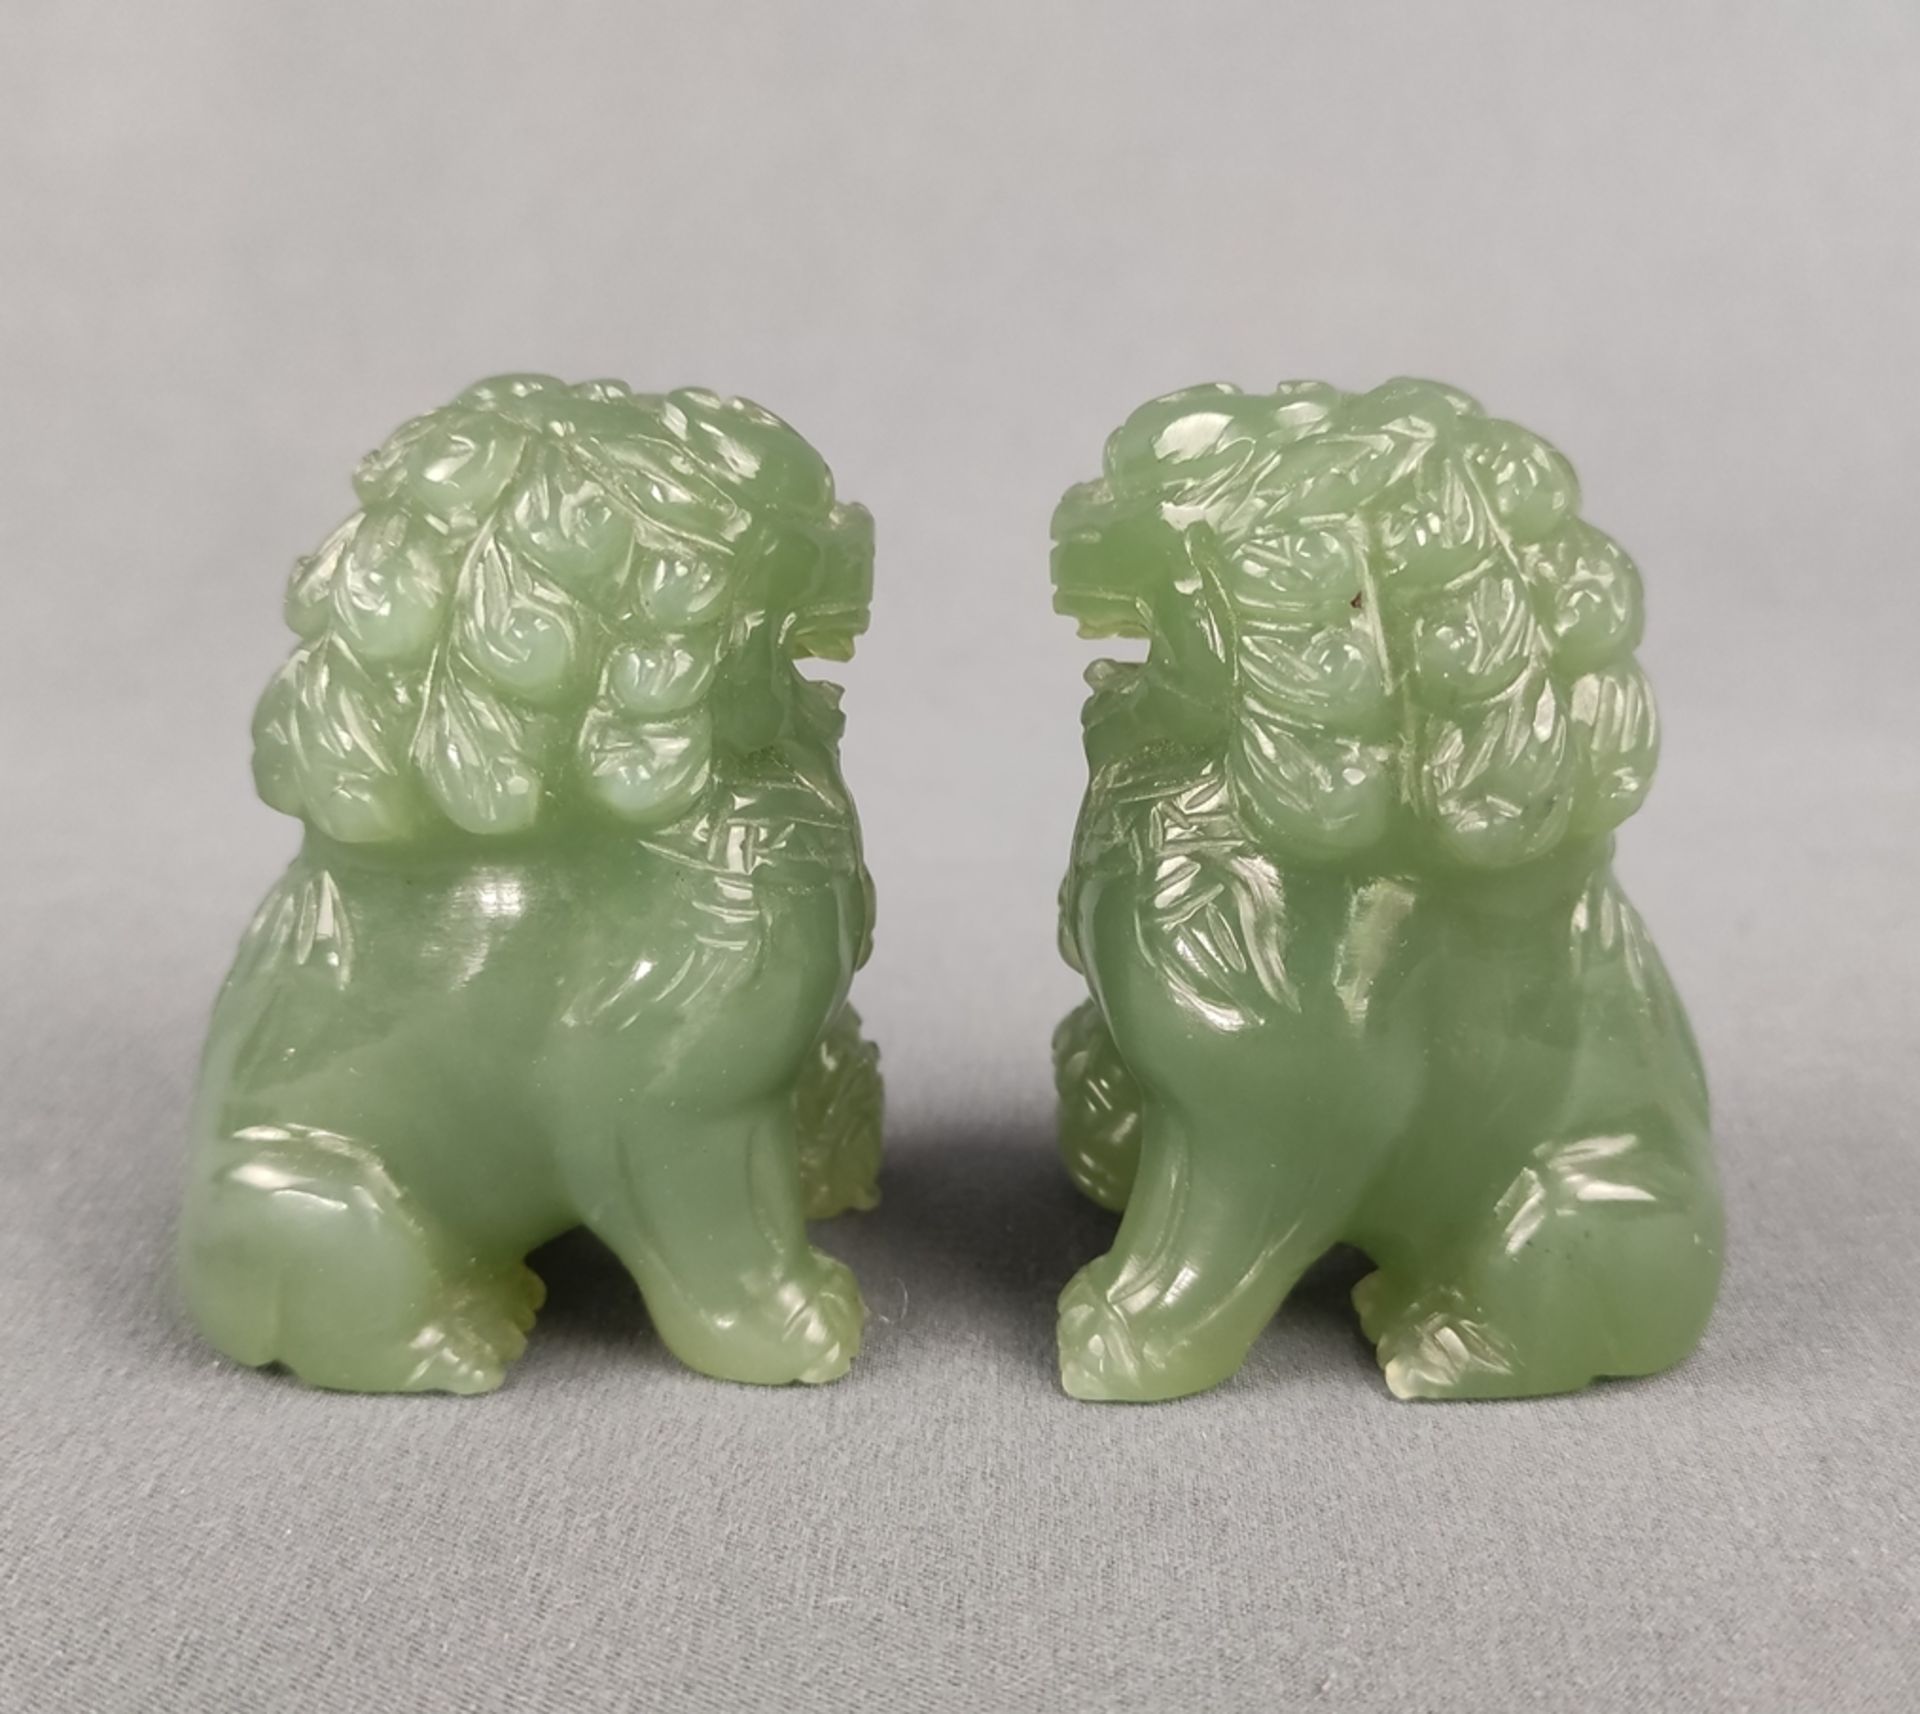 Pair of guardian lions/ Fo dogs, jade carved, China, 20th century, height approx. 6cm each *832/03  - Image 3 of 4